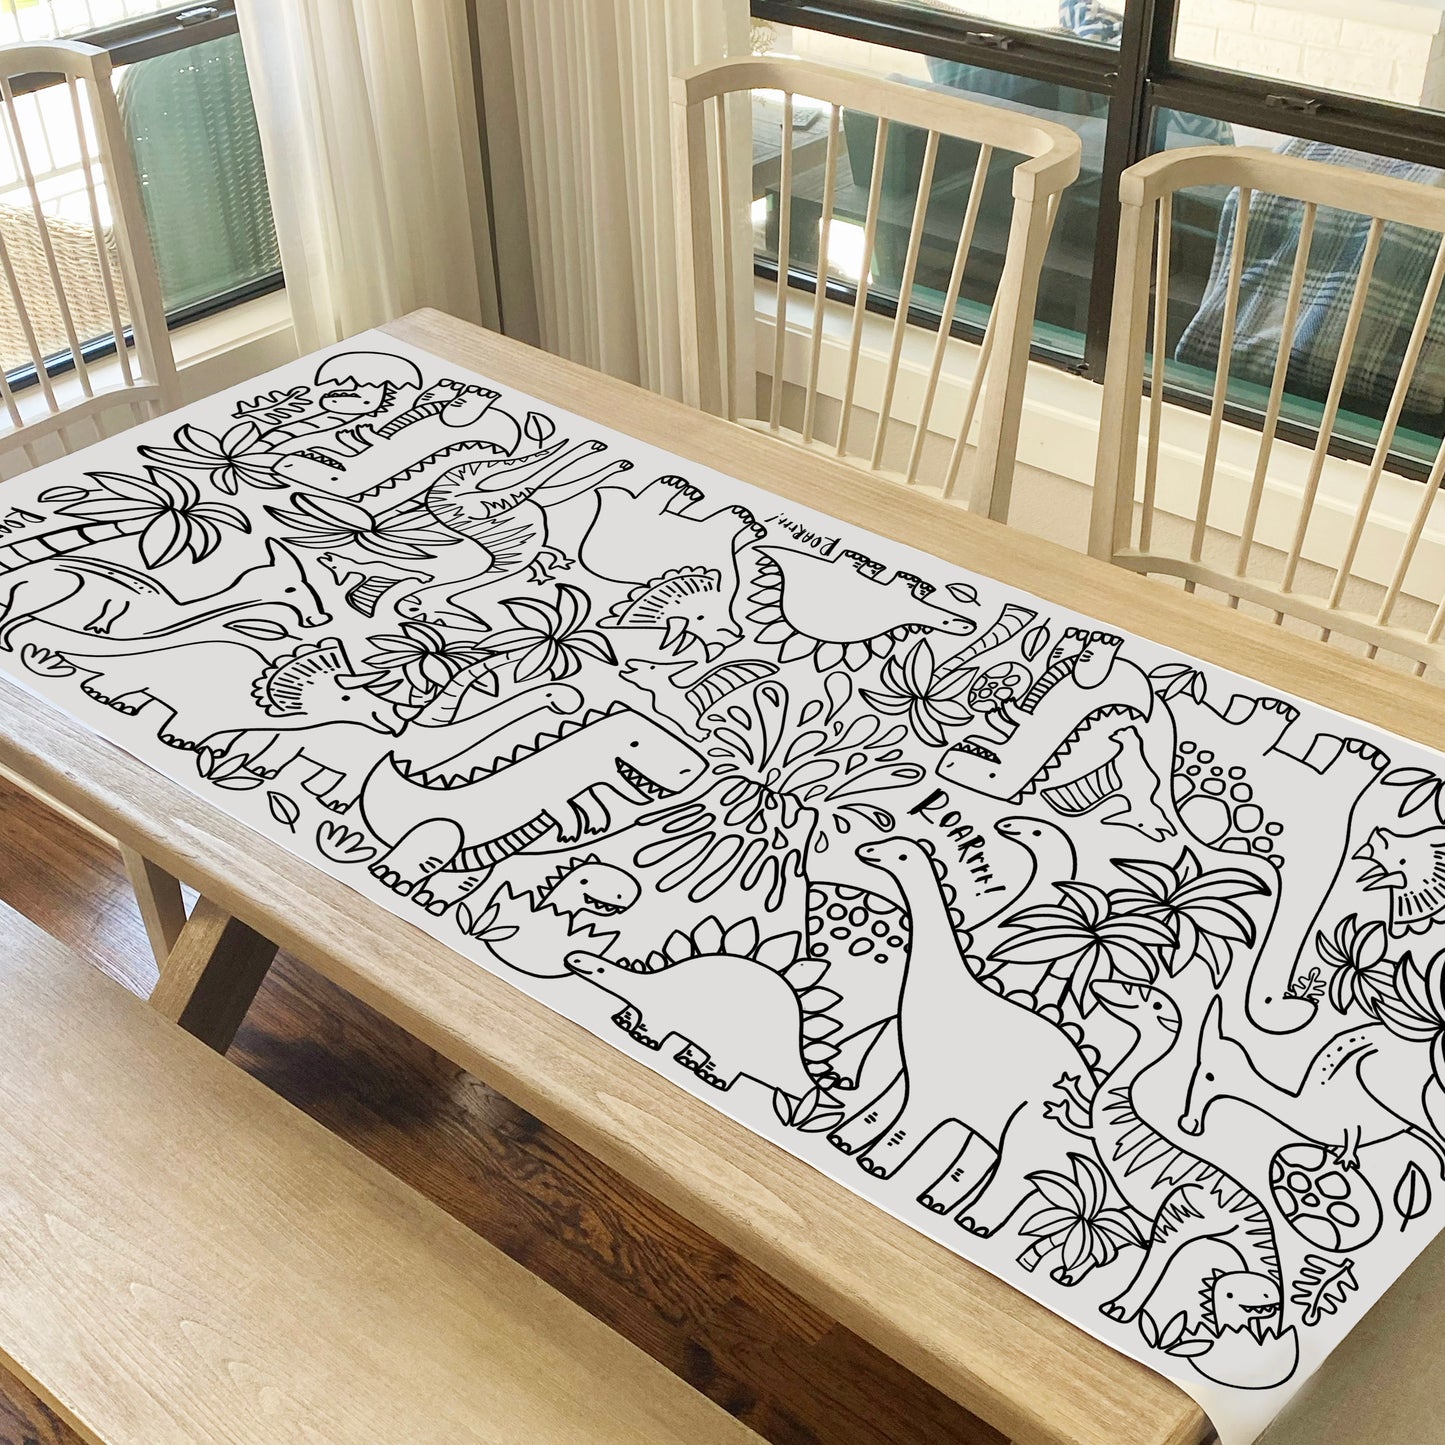 Giant Dinosaur Coloring Banner by Tiny Expressions